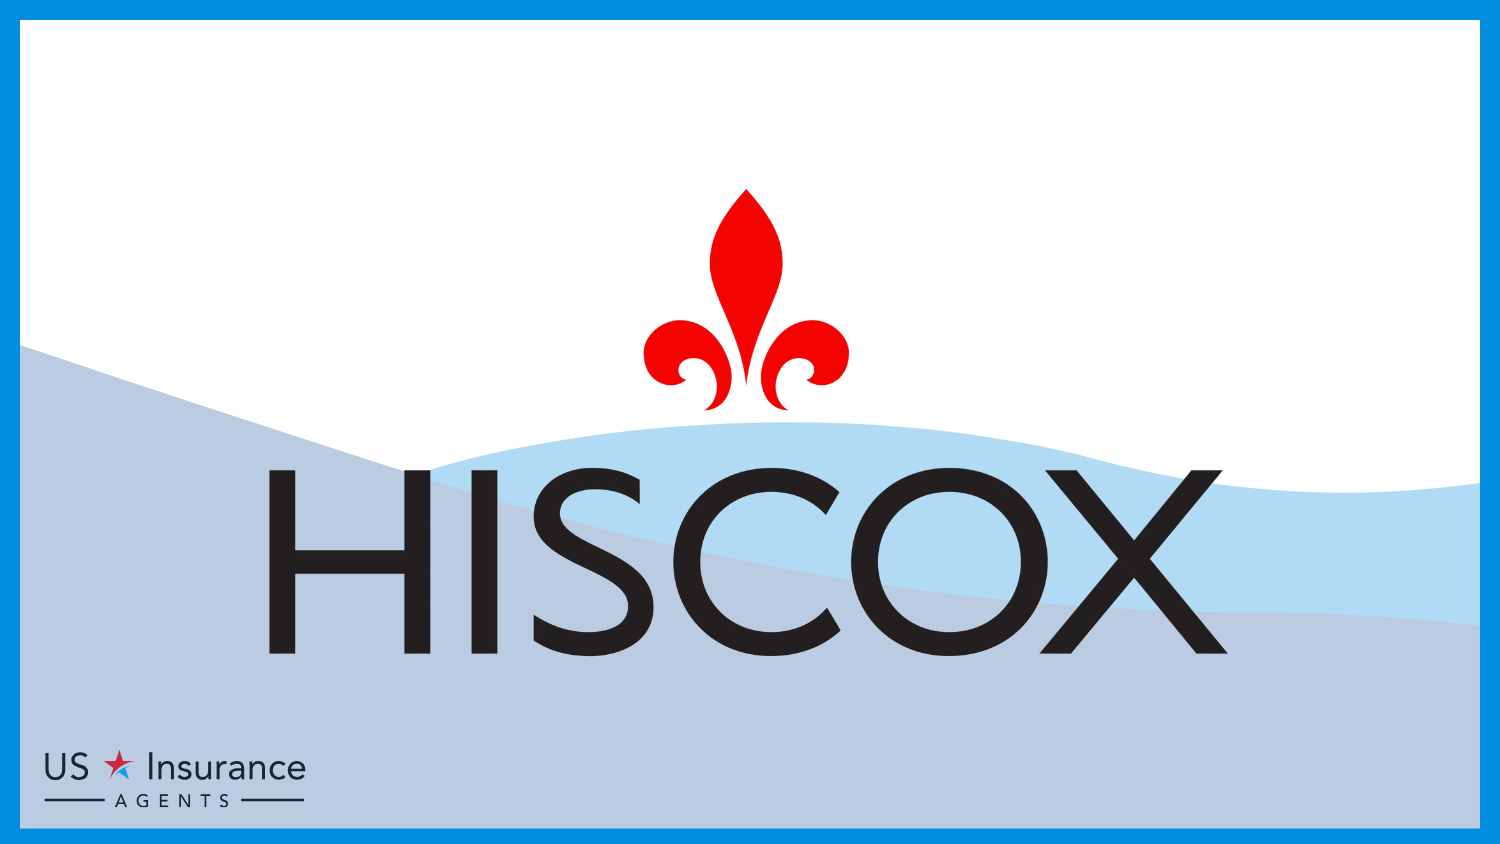 Hiscox: Best Business Insurance for Party Equipment Rentals